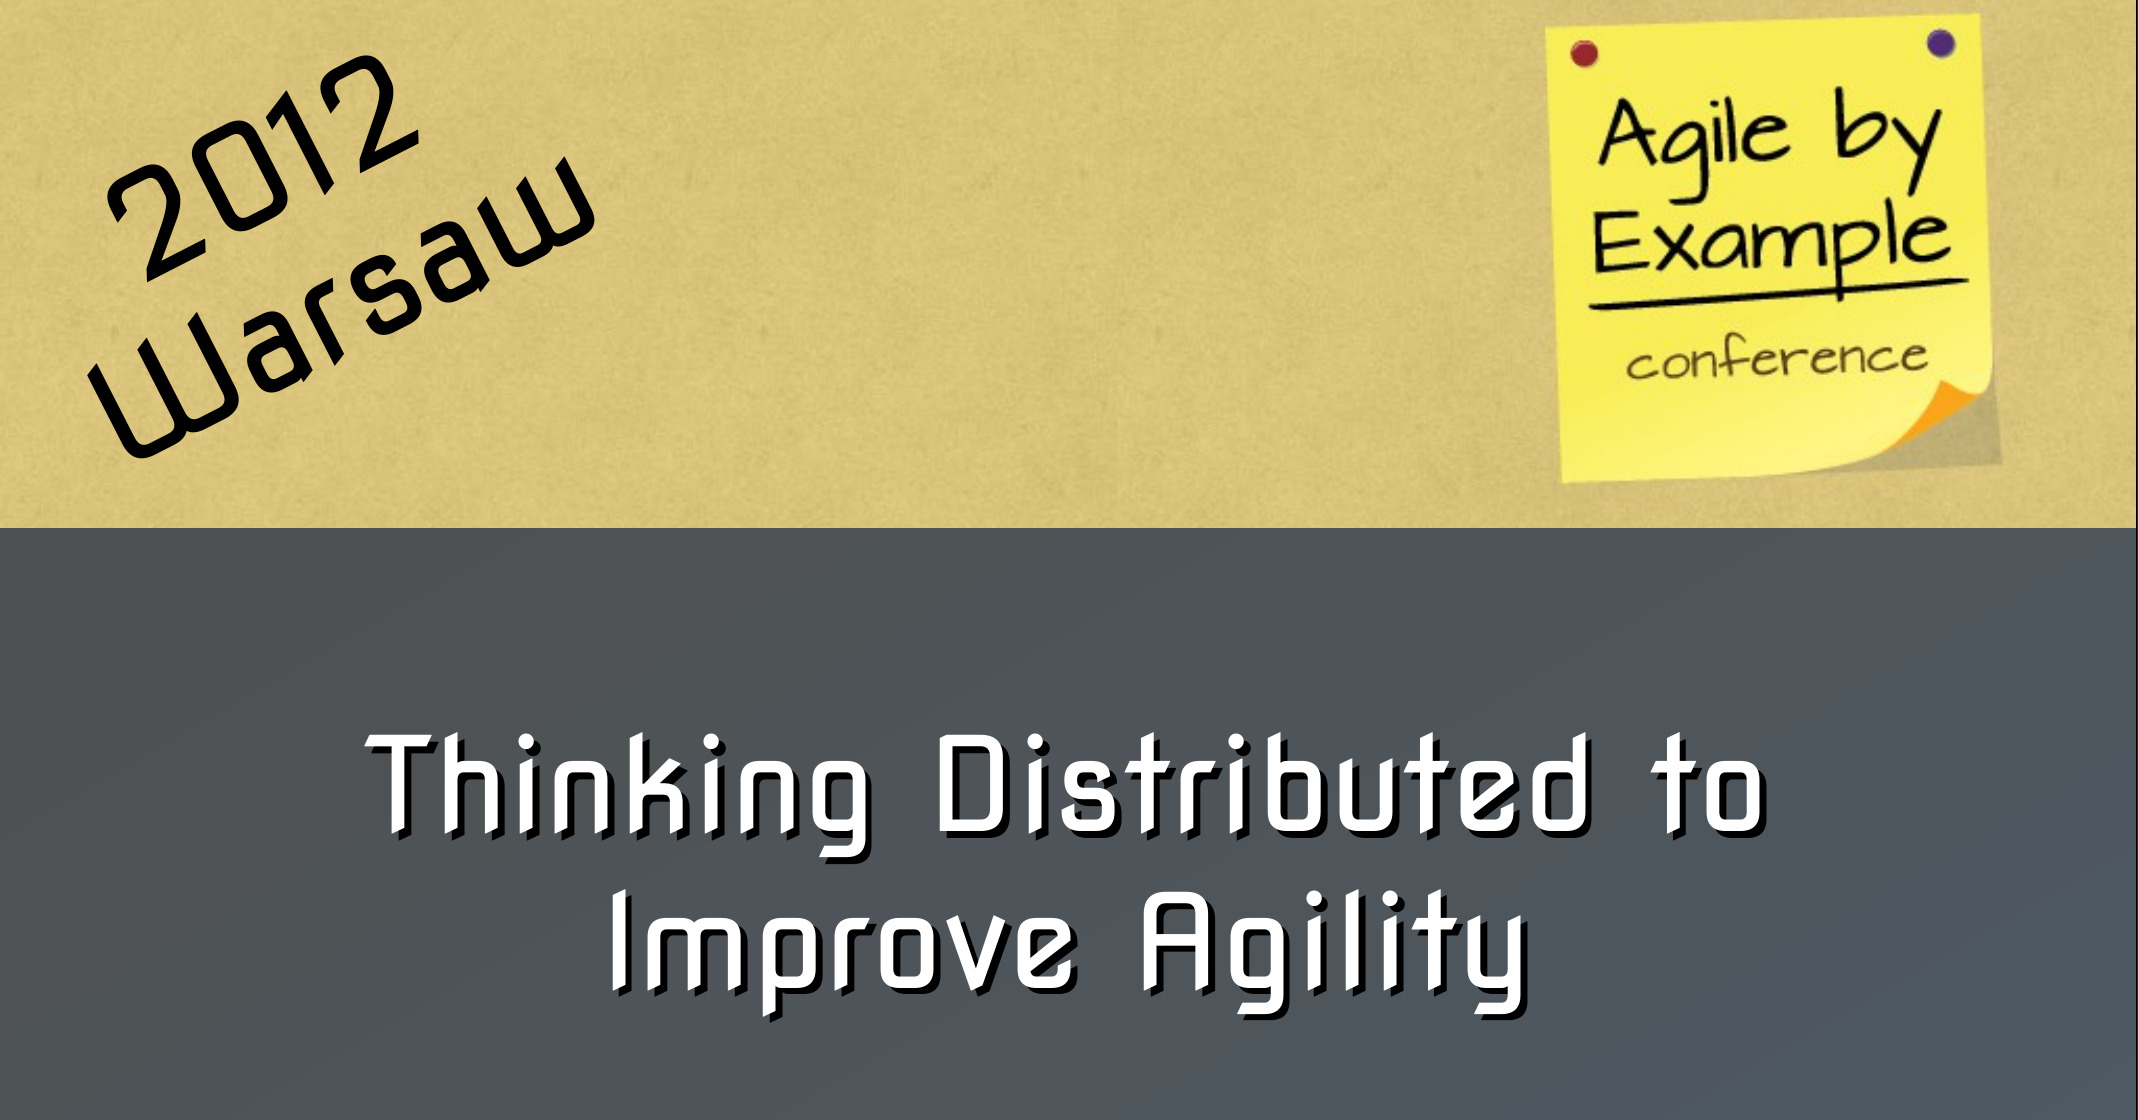 Agile By Example: Thinking Distributed to Improve Agility